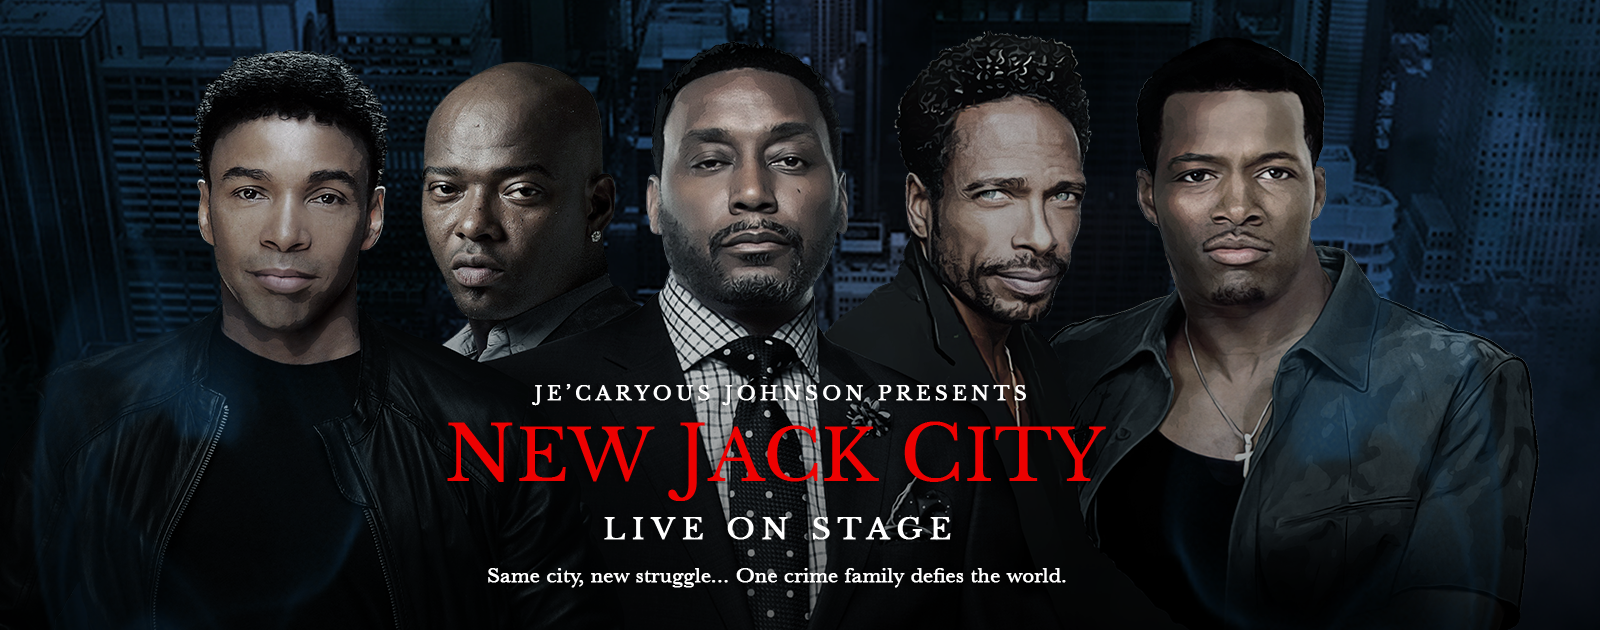 Rescheduled - Je’Caryous Johnson presents New Jack City